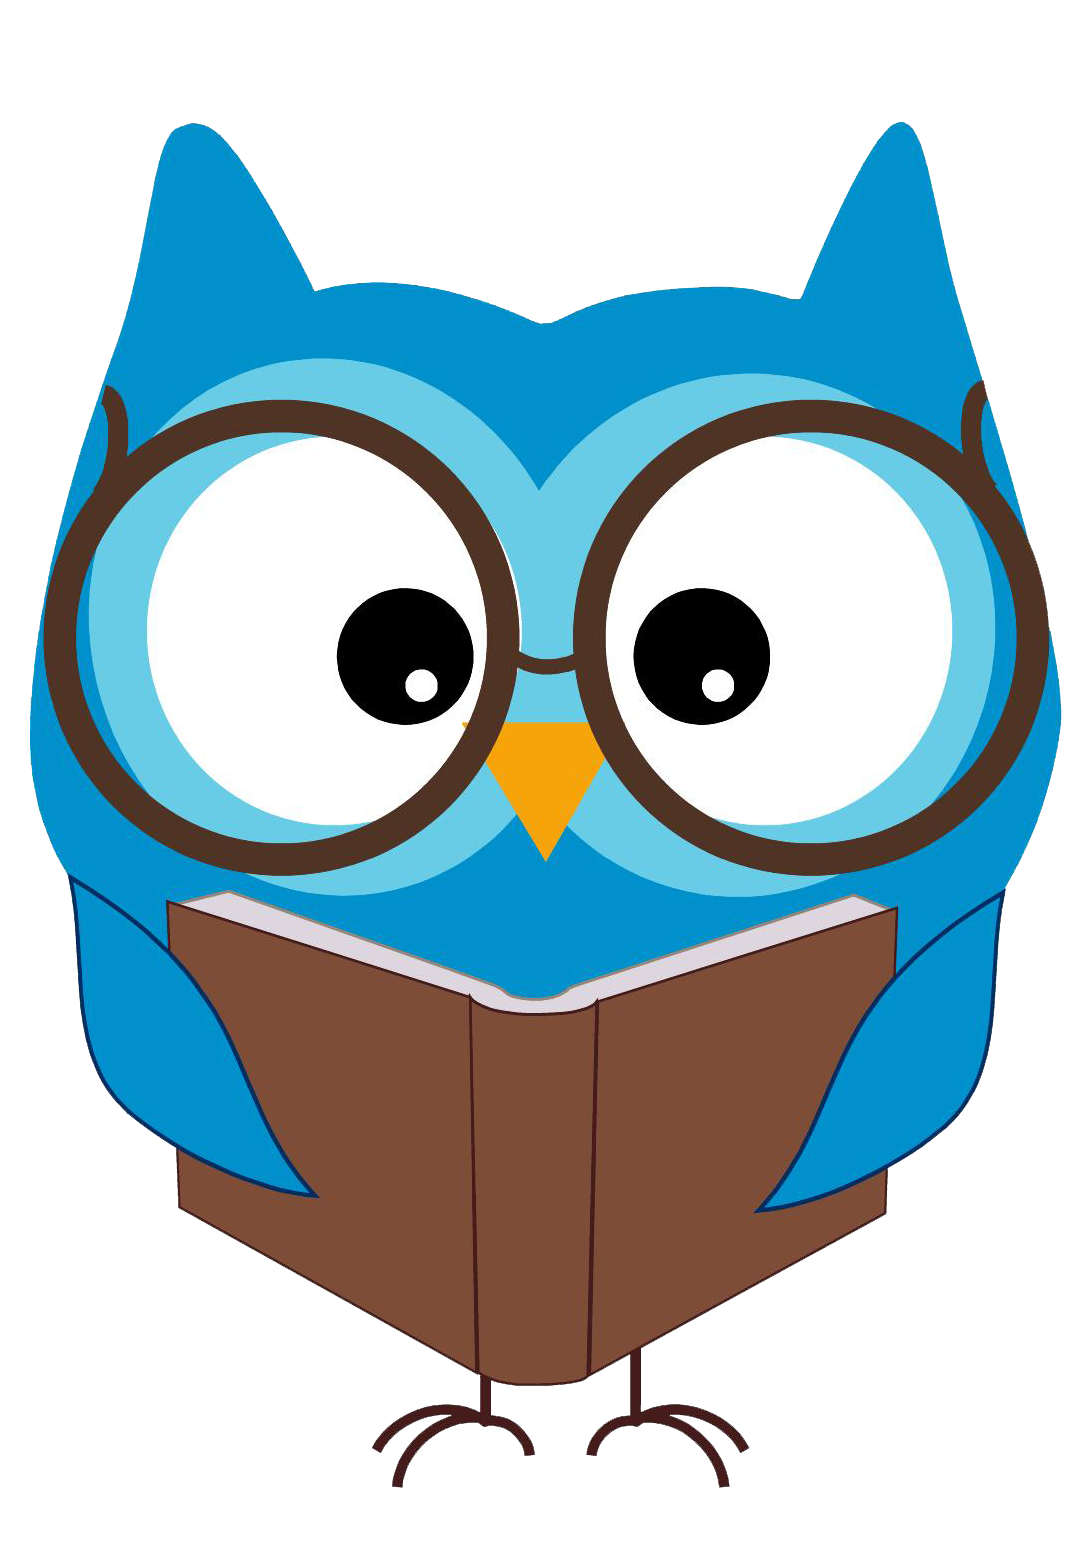 Owl books clipart images